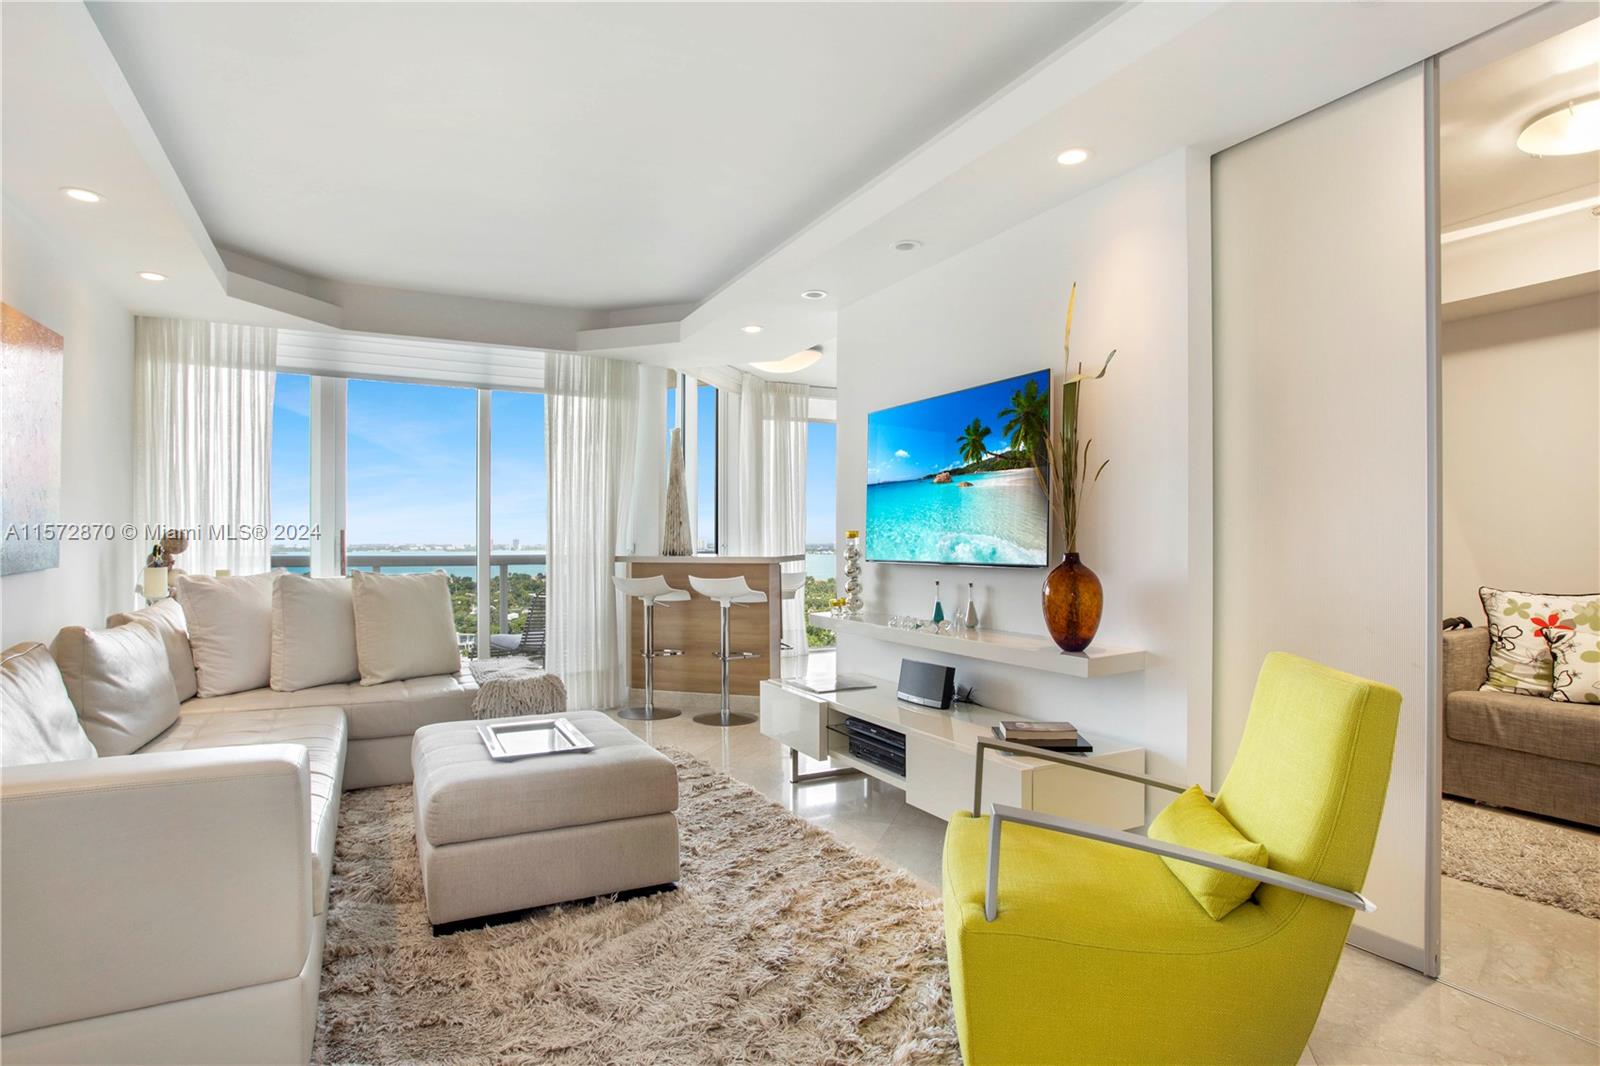 Beautifully renovated one-bedroom, two-full-bath condo, complete with a  den that is used  as a second bedroom. The unit features marble flooring throughout and is elegantly furnished, ready for immediate move-in. Step out onto the expansive terrace and be greeted by breathtaking views of the Miami skyline, Bay, and Intracoastal. Available for an annual lease, this residence offers a luxurious living experience. The building itself boasts superb amenities, enhancing your lifestyle with every comfort and convenience at your fingertips.